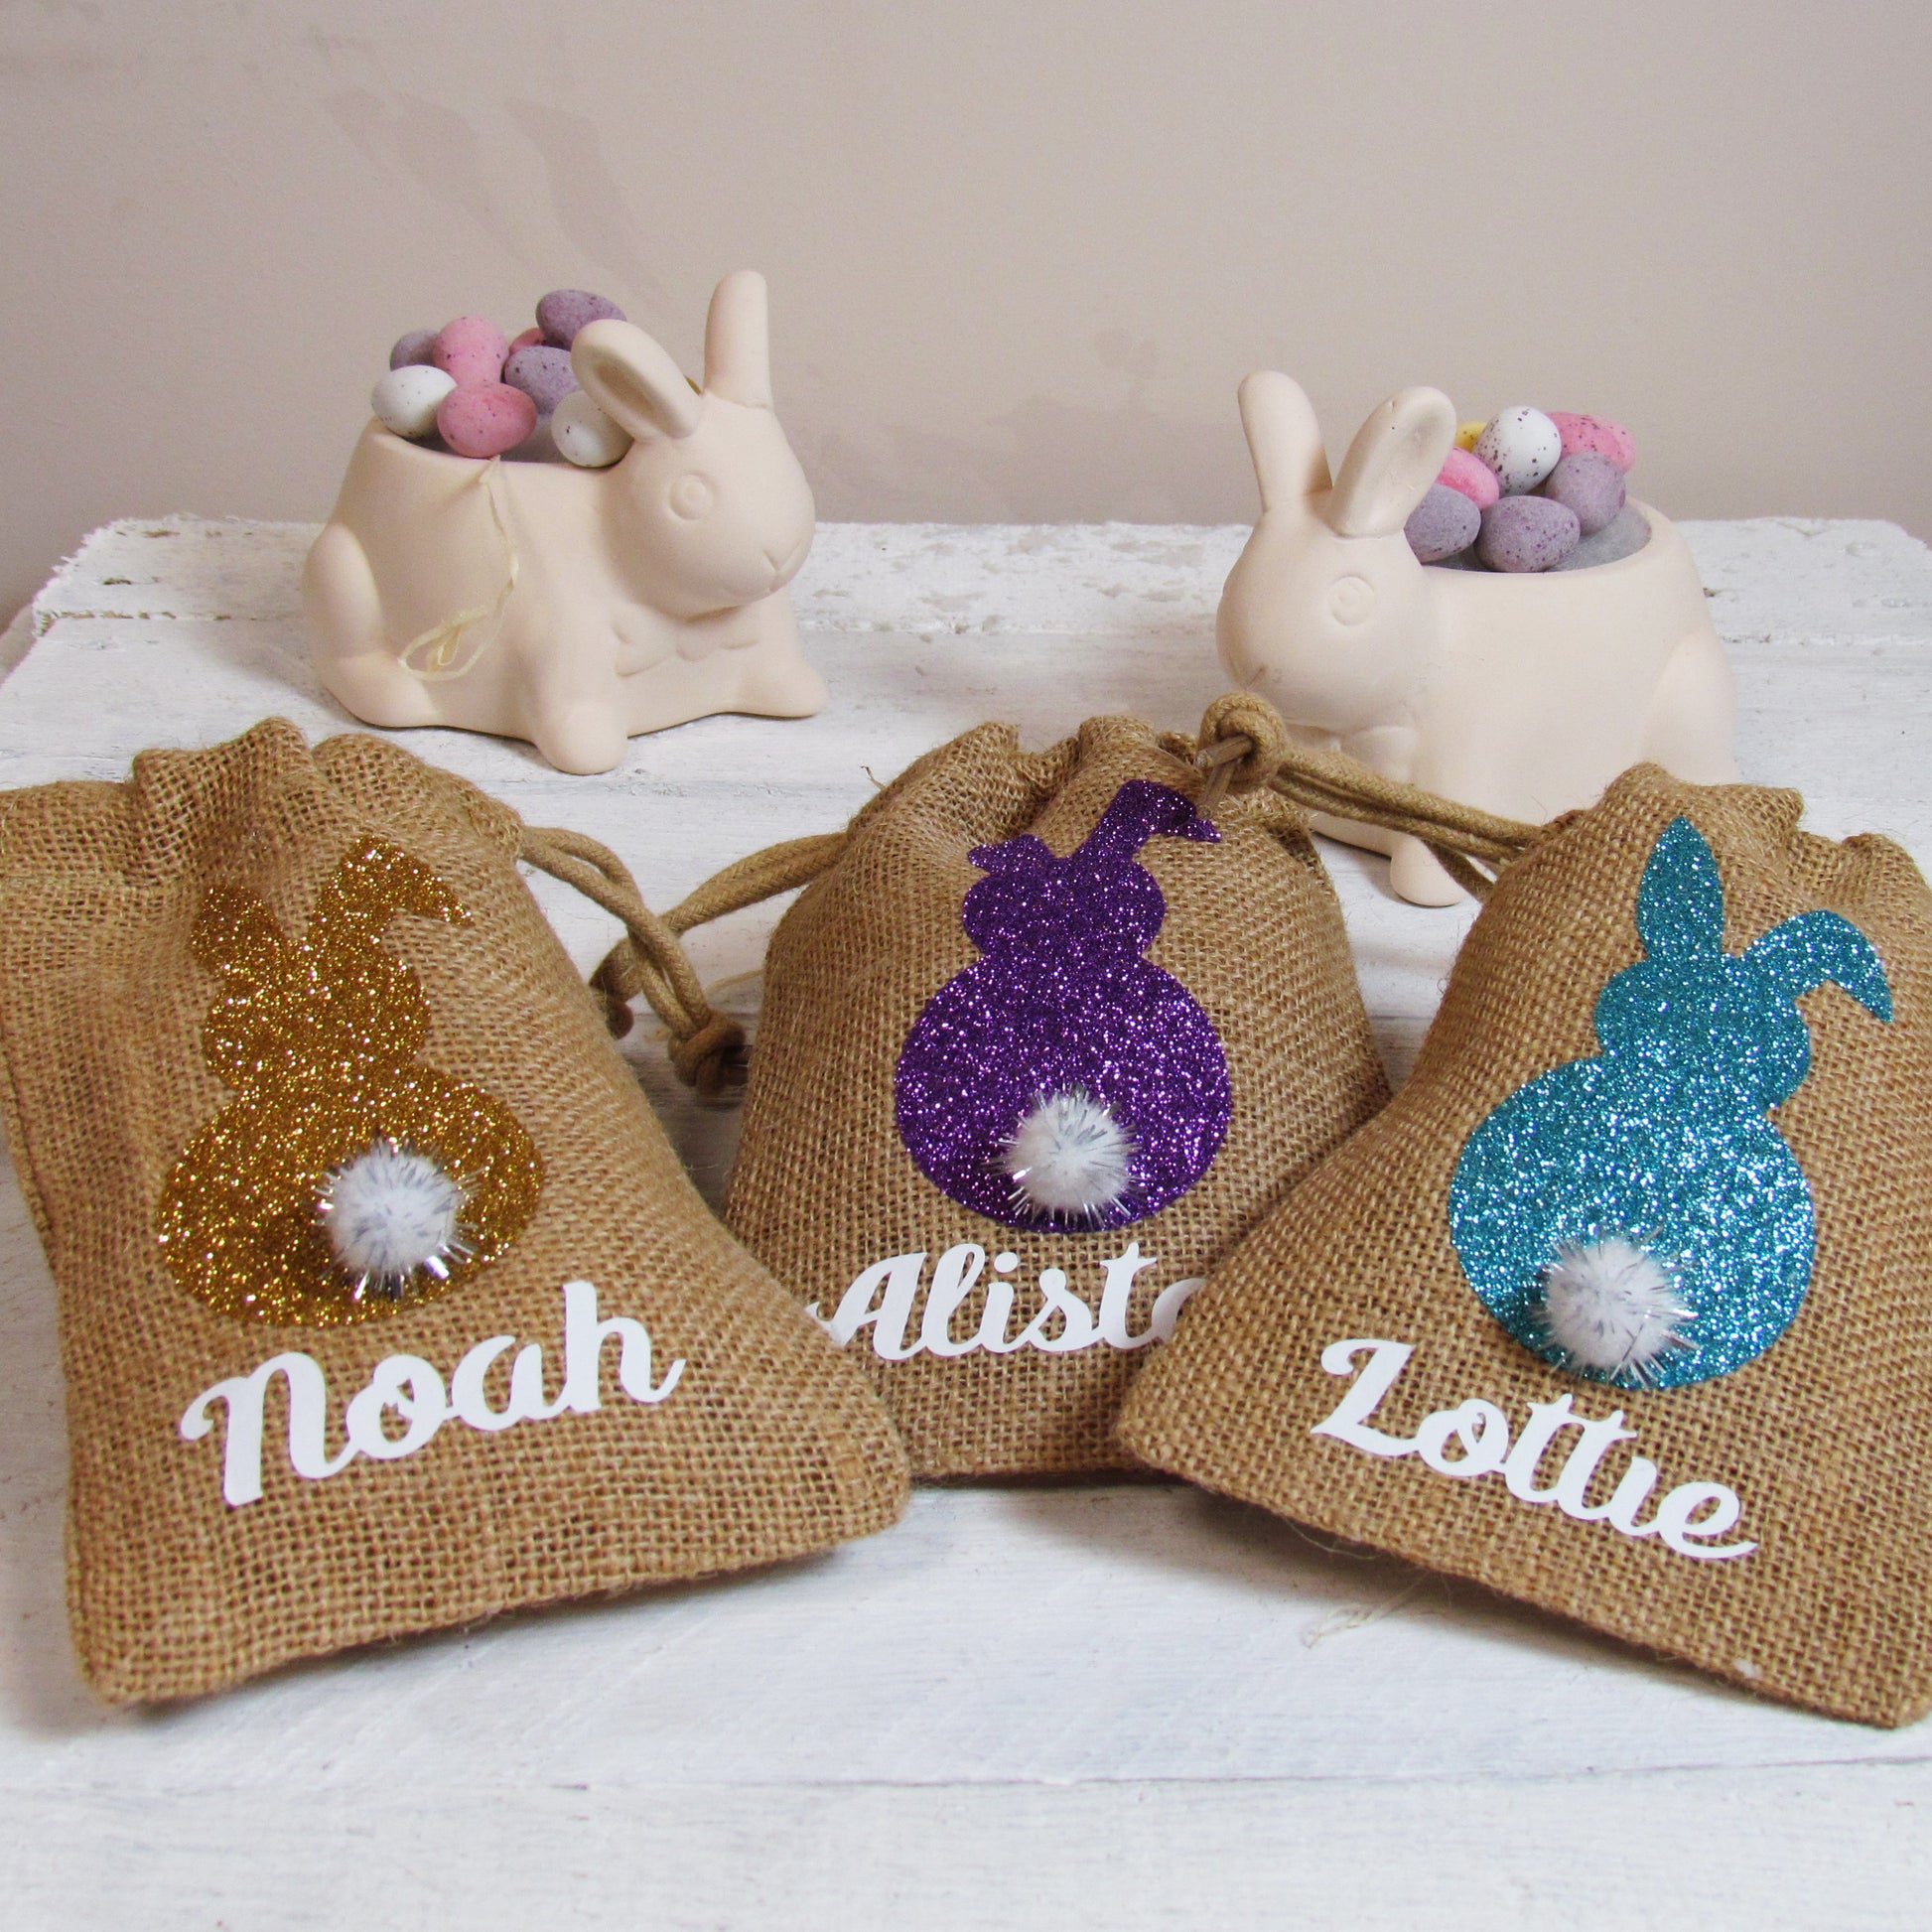 Personalised mini jute bags for Easter treats or place settings